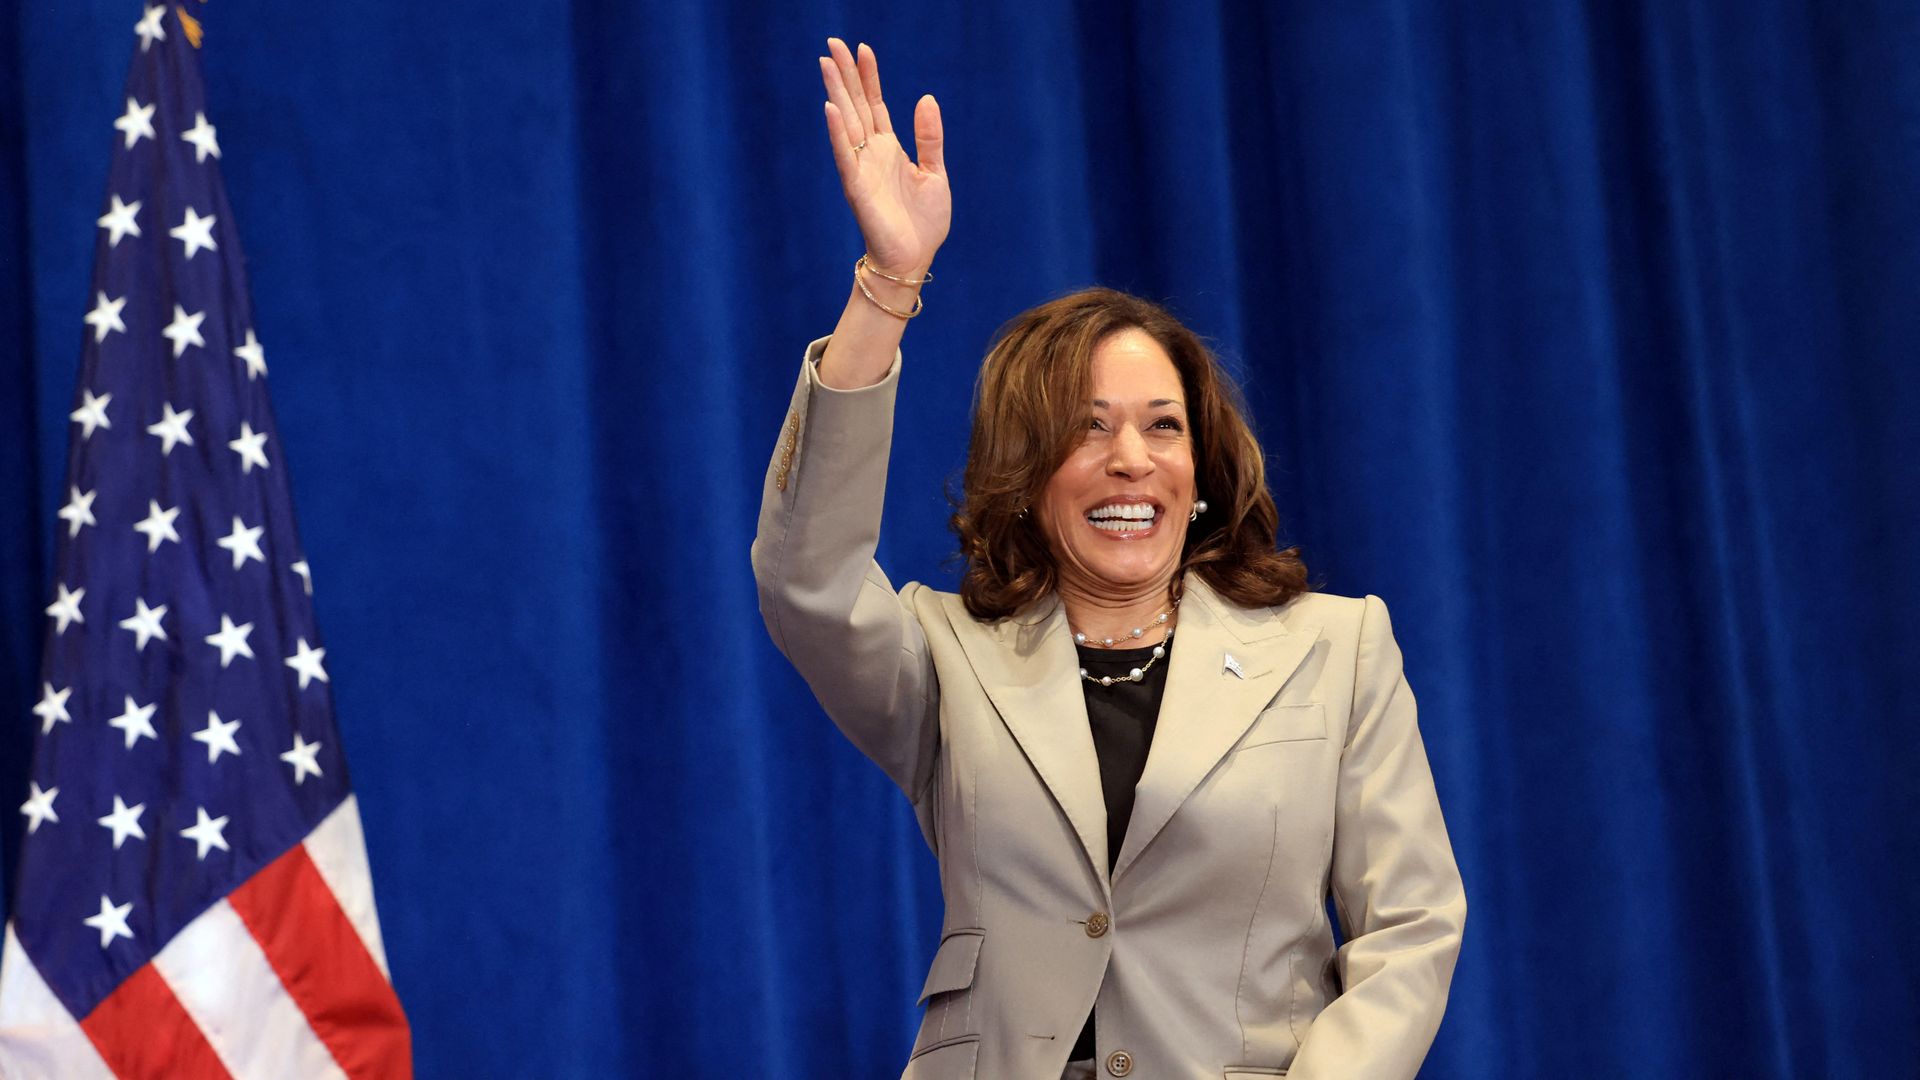 As Obama stops short of backing Kamala Harris, who is supporting the vice president?